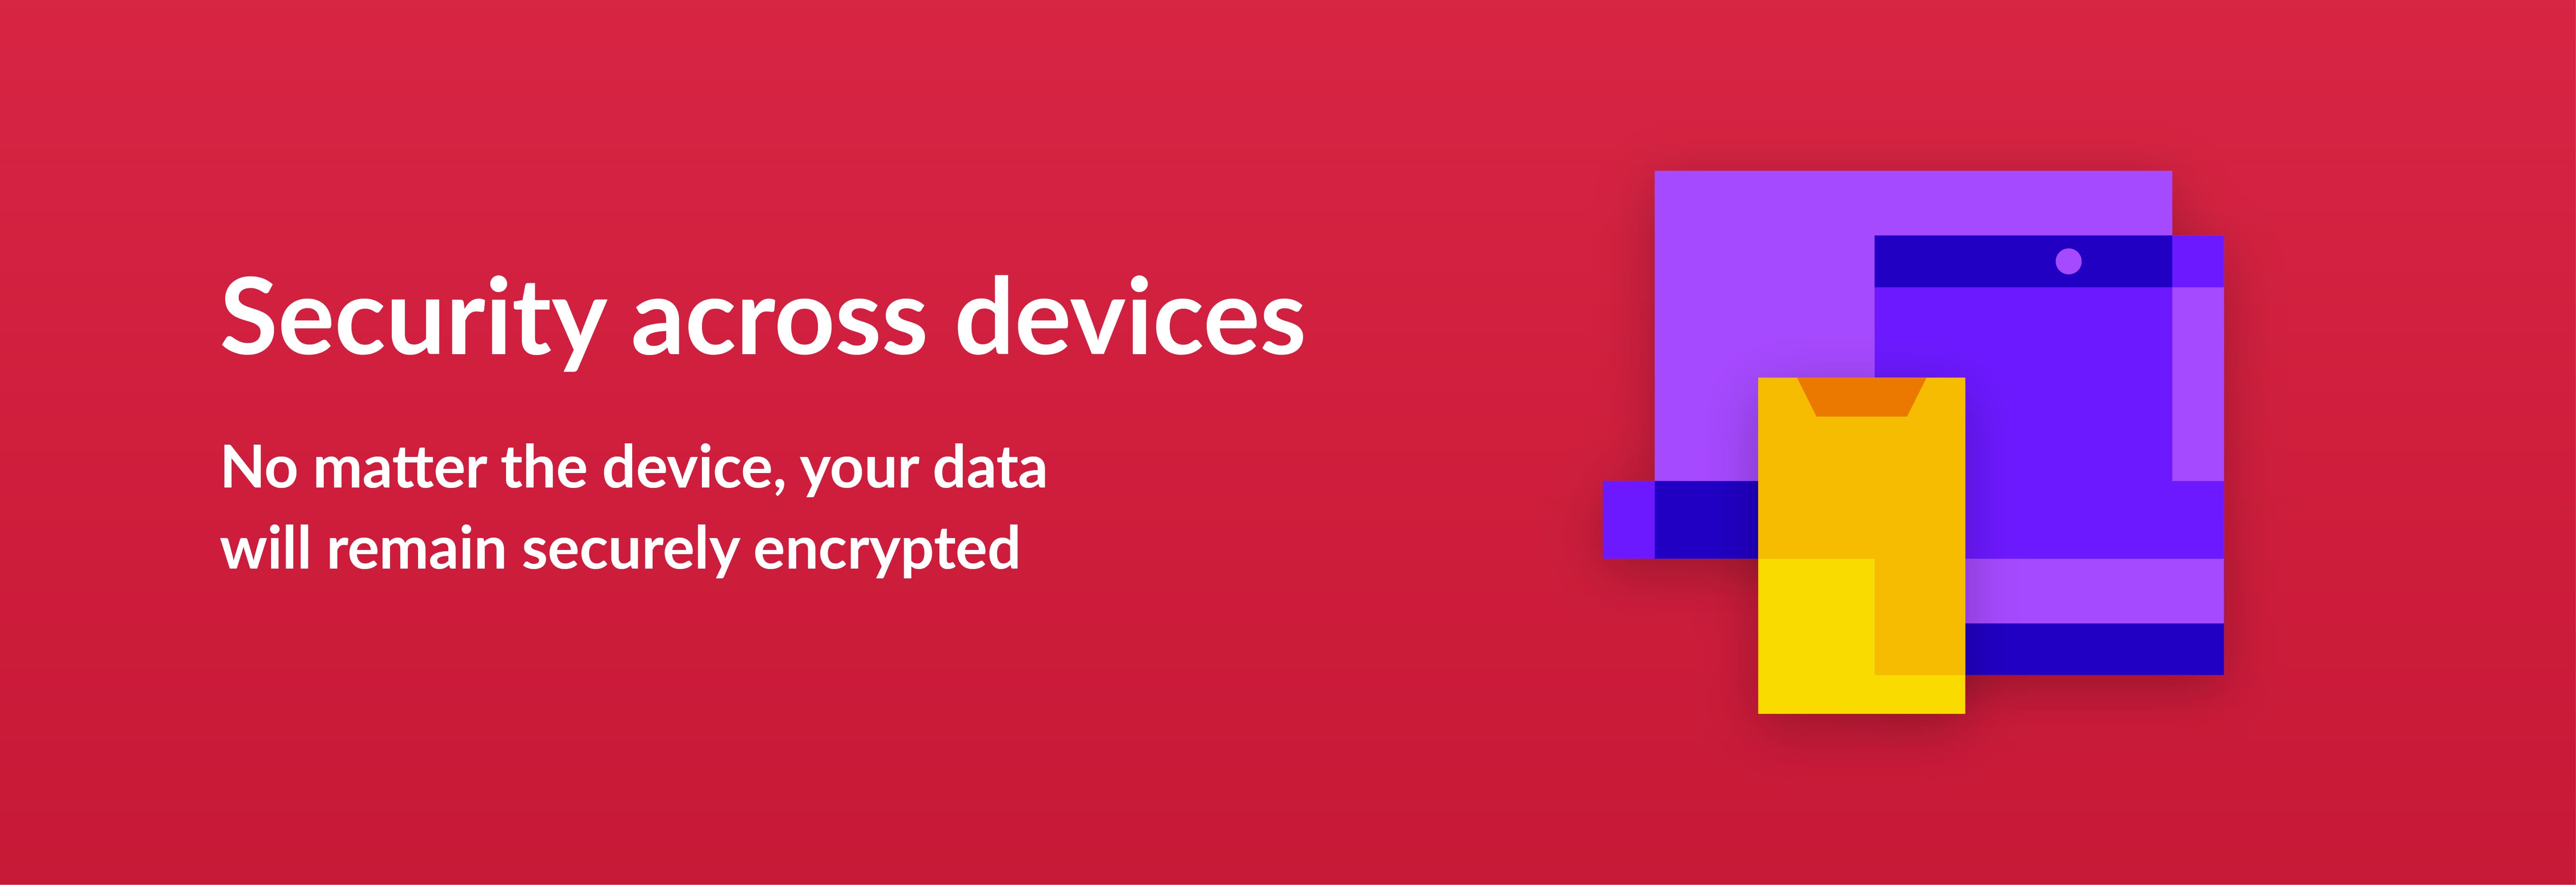 Security across devices - no matter the device, your data will remain securely encrypted